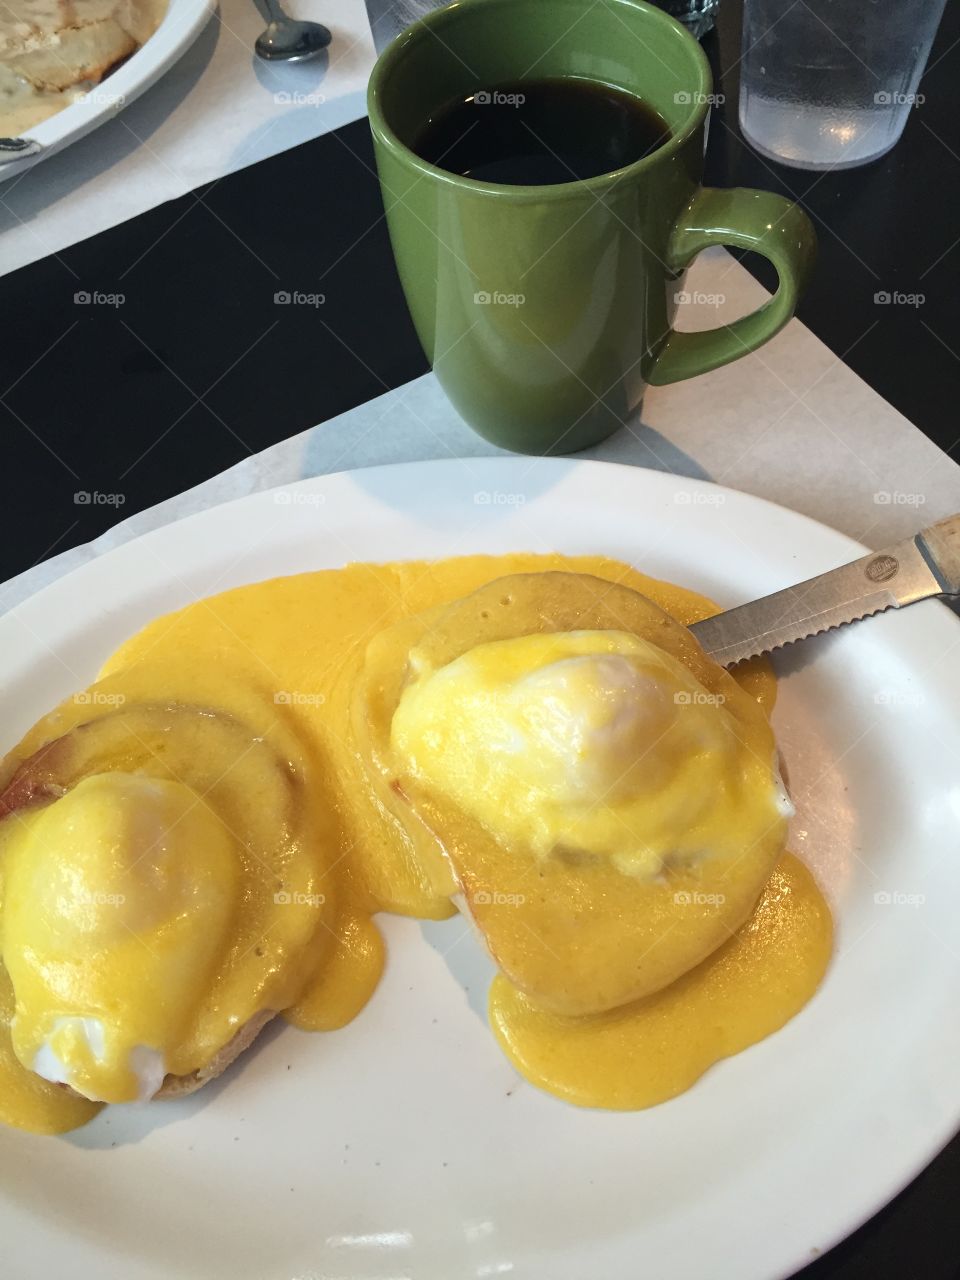 Home cooked eggs Benedict.